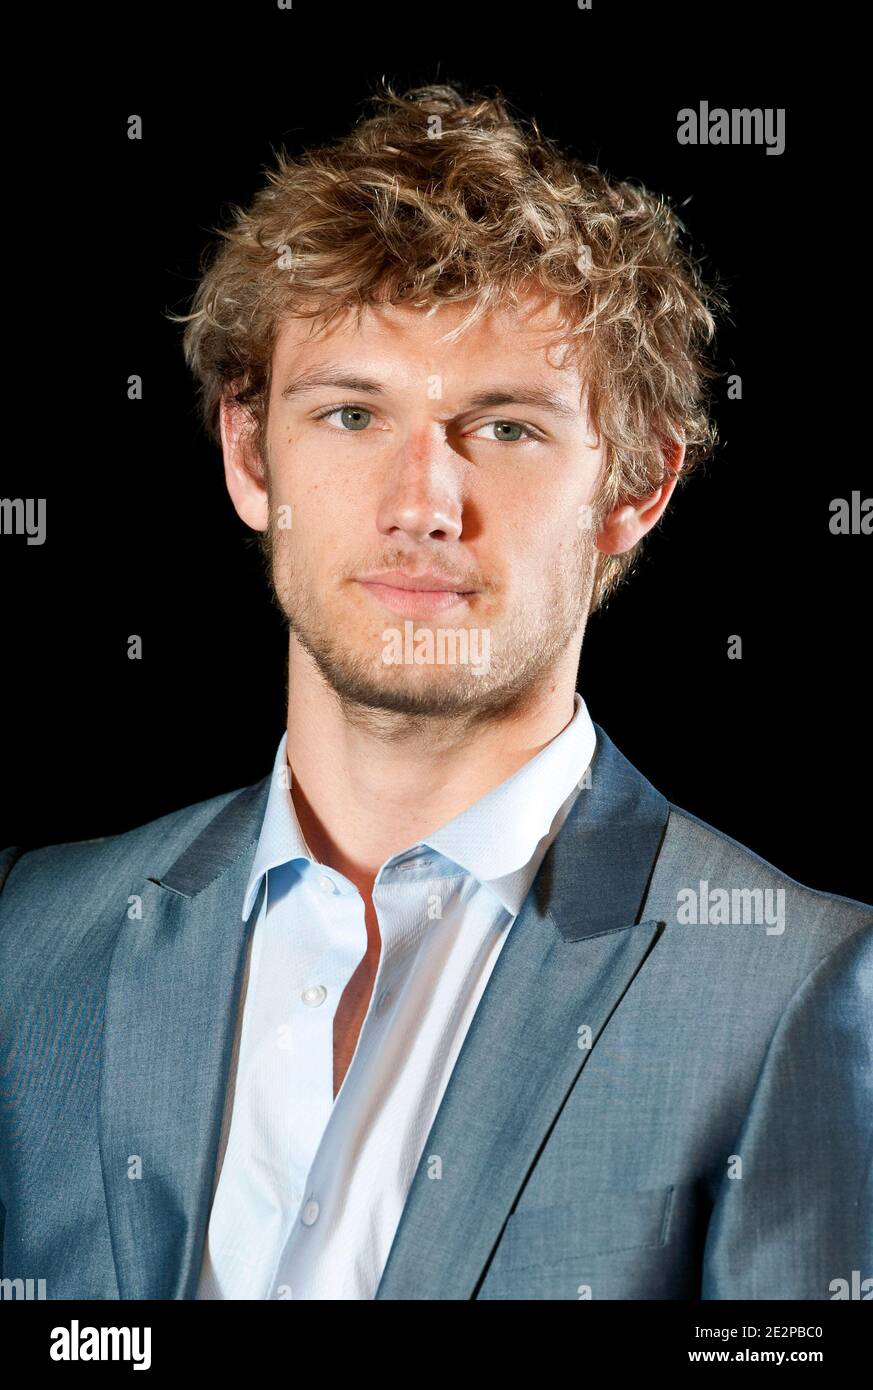 Alex Pettyfer High Resolution Stock Photography and Images - Alamy